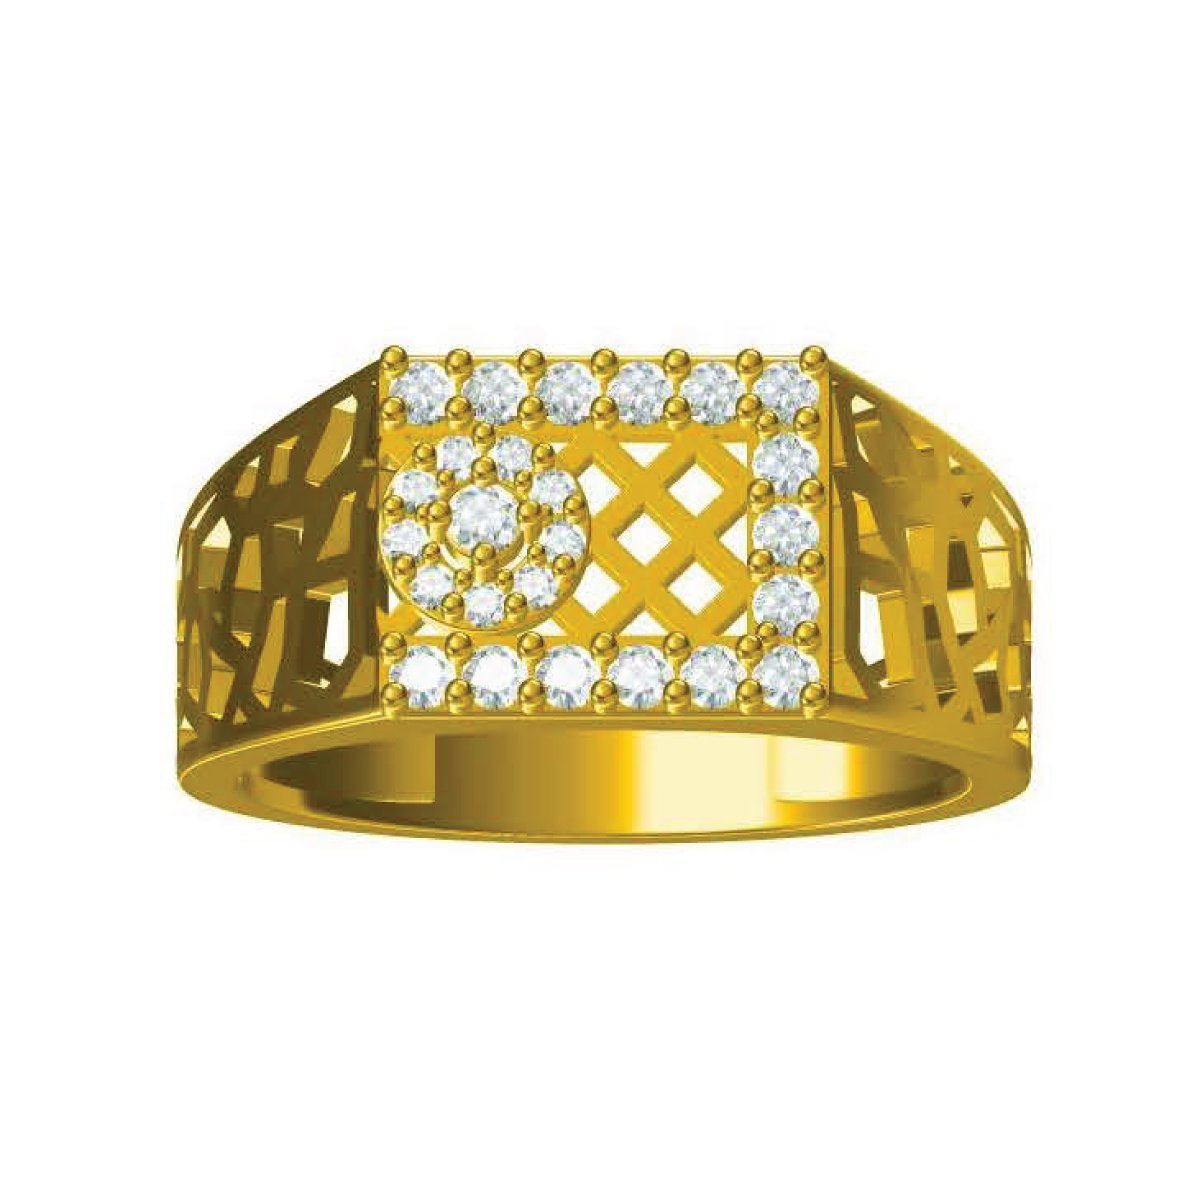 LATEST GOLD RING DESIGNS FOR MEN WITH WEIGHT | Gold ring designs, Latest  gold ring designs, Mens ring designs